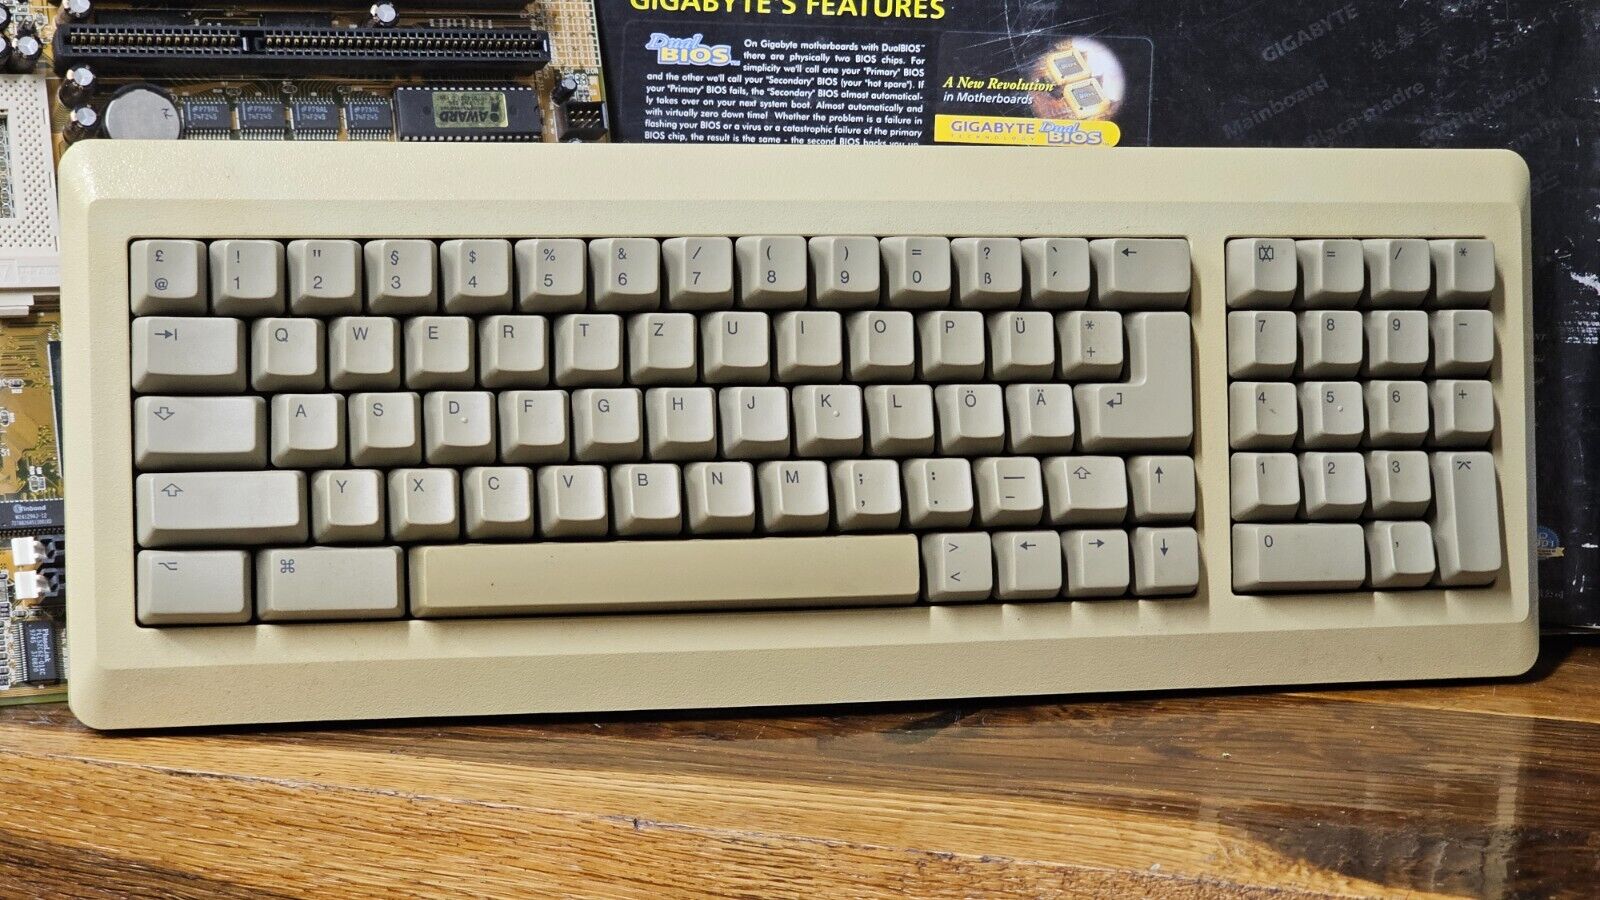 Apple Computer, Inc / VINTAGE KEYBOARD - MODEL NUMBER: M0110A / MADE IN USA